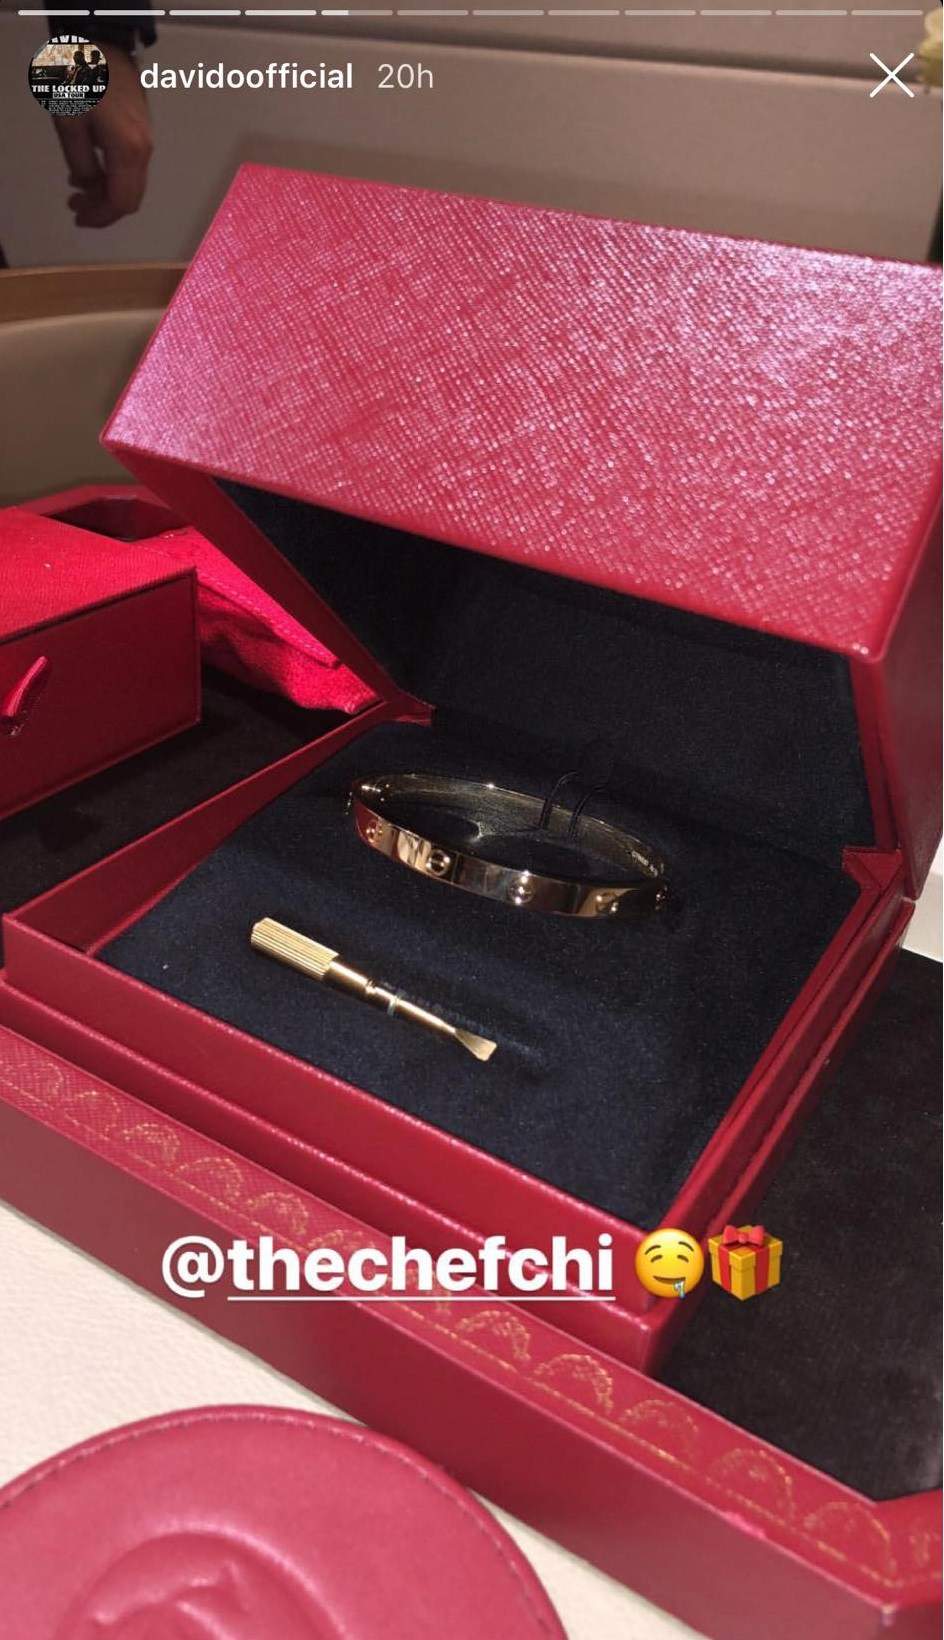 Davido gifts wife, Chioma a Cartier bracelet worth N2.2 million